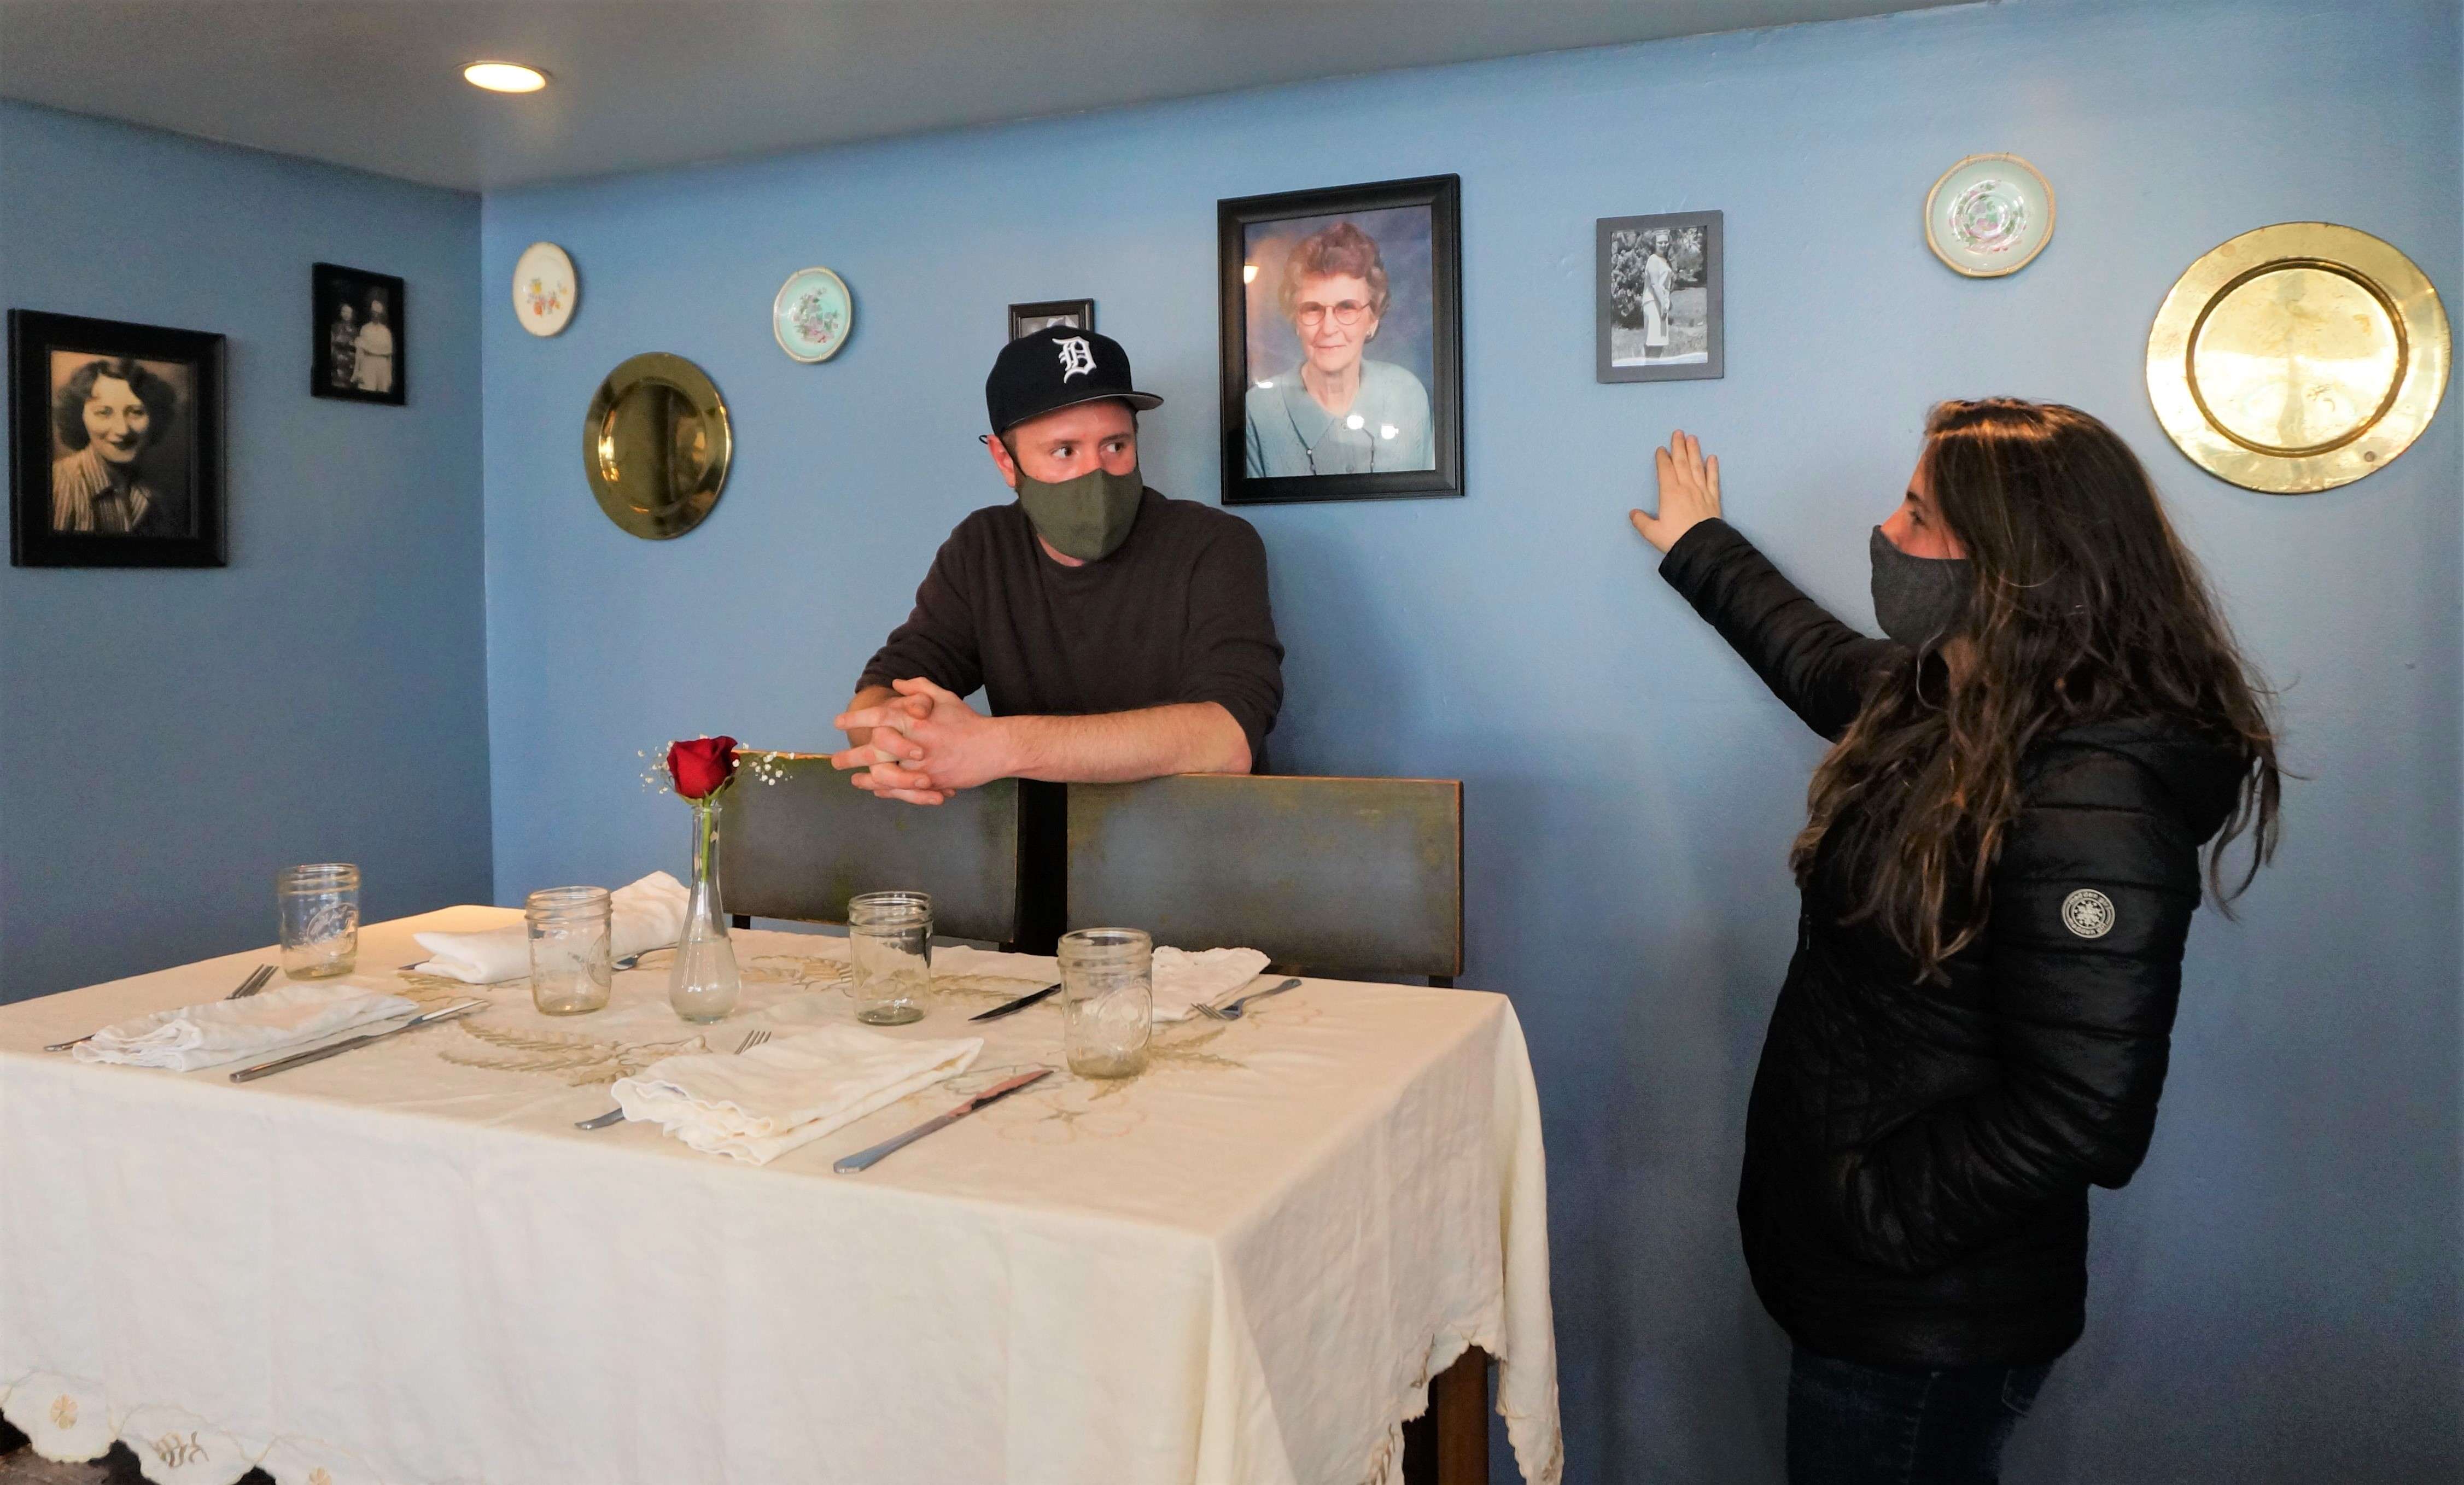 A white man with a mask and a Detroit Tigers hat leans on a chair behind a dining table set with a white table cloth and napkins, while a woman points to a photo of an older woman on the wall.